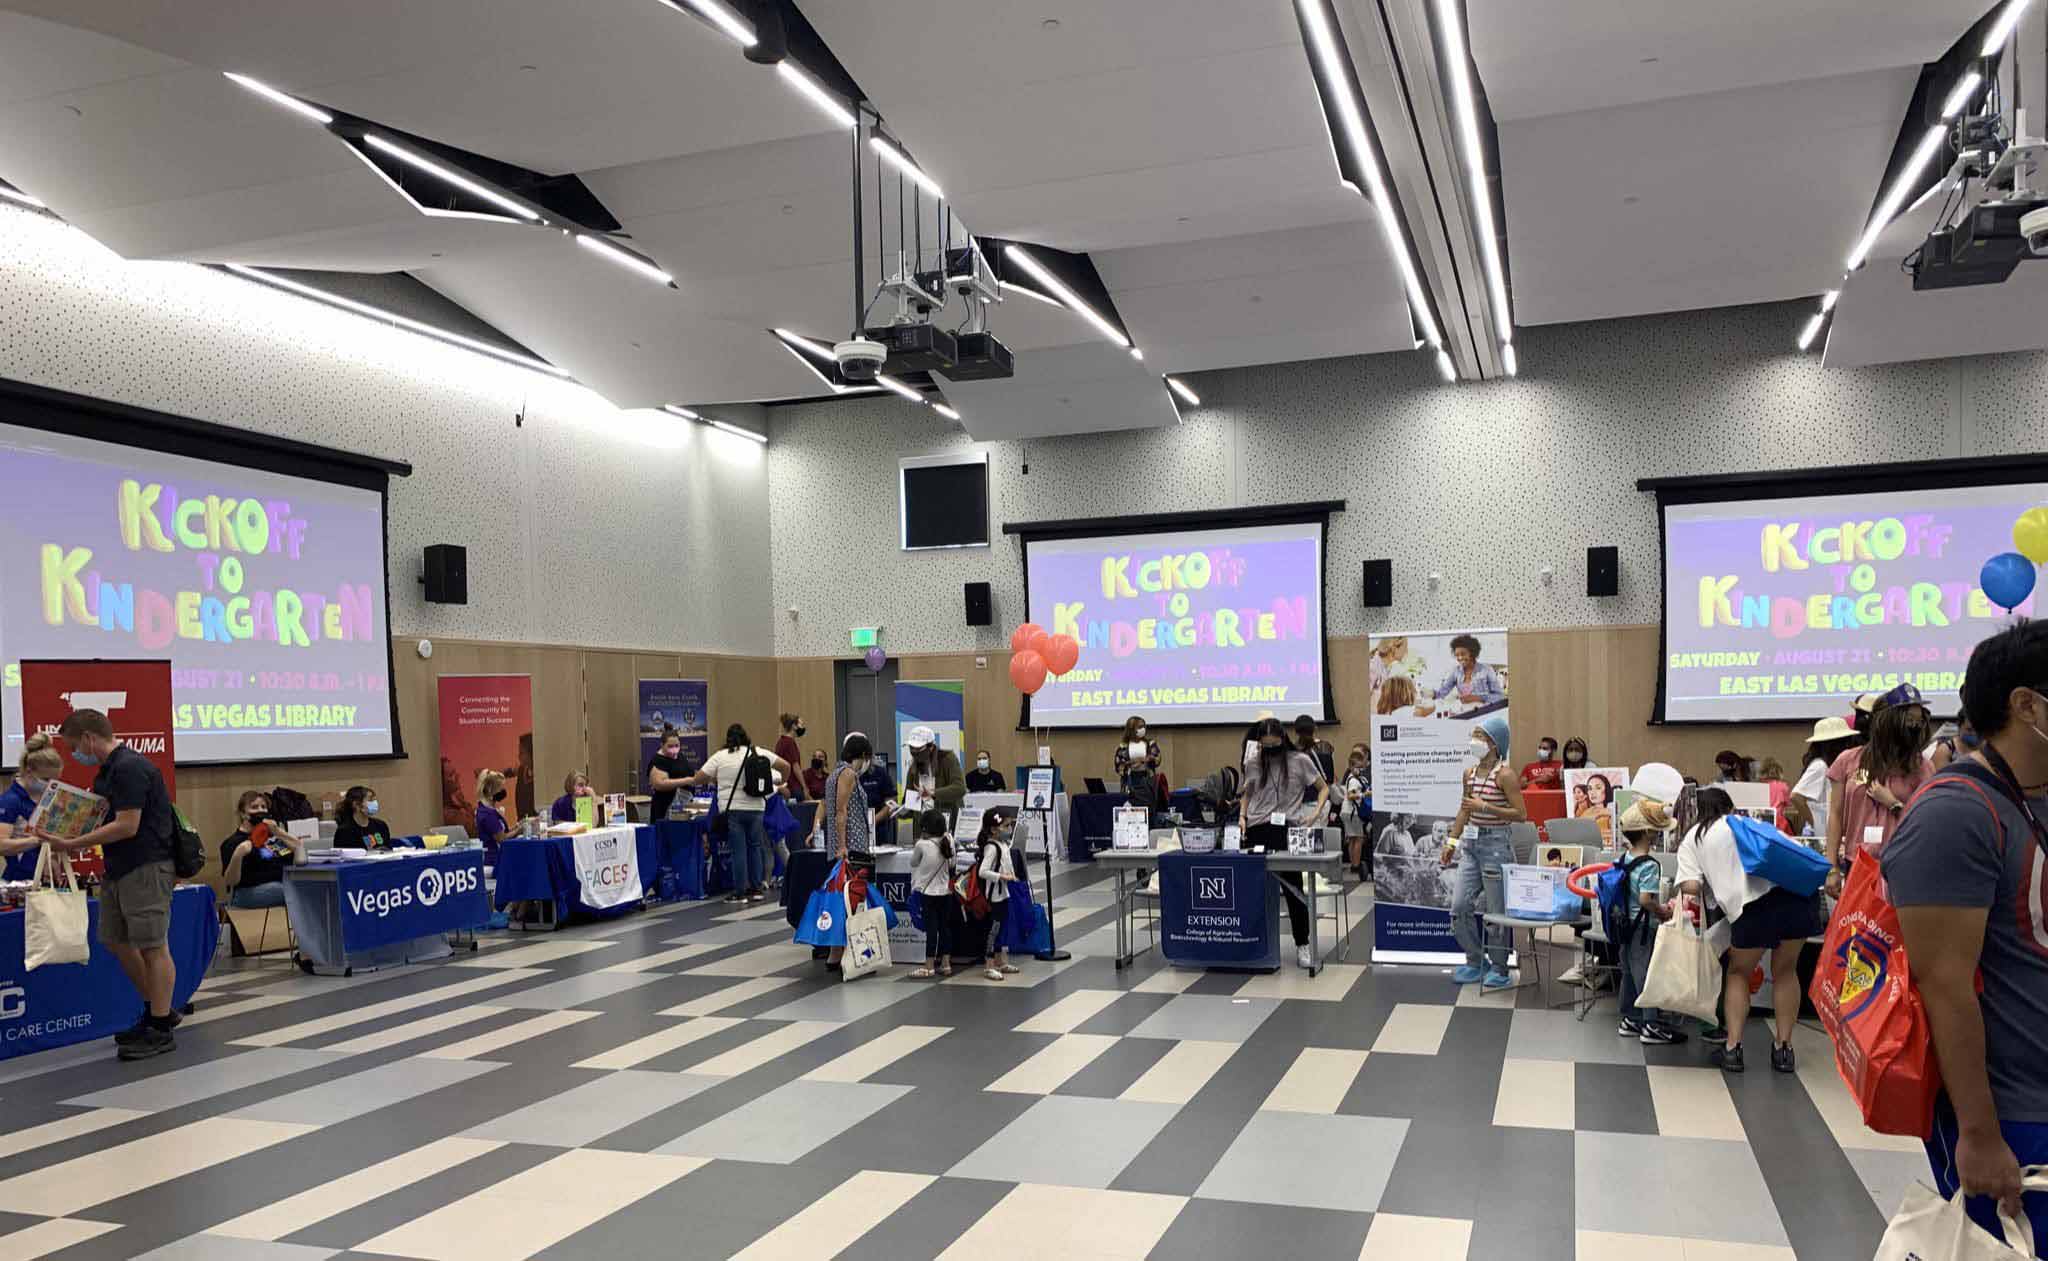 A large, open room is flanked with colorful tables and booths staffed by masked community partners. Masked families and children are exploring the booth and participating in the activities. On several projector screens in the room are the words Kickoff to Kindergarten in a colorful, child-like font.